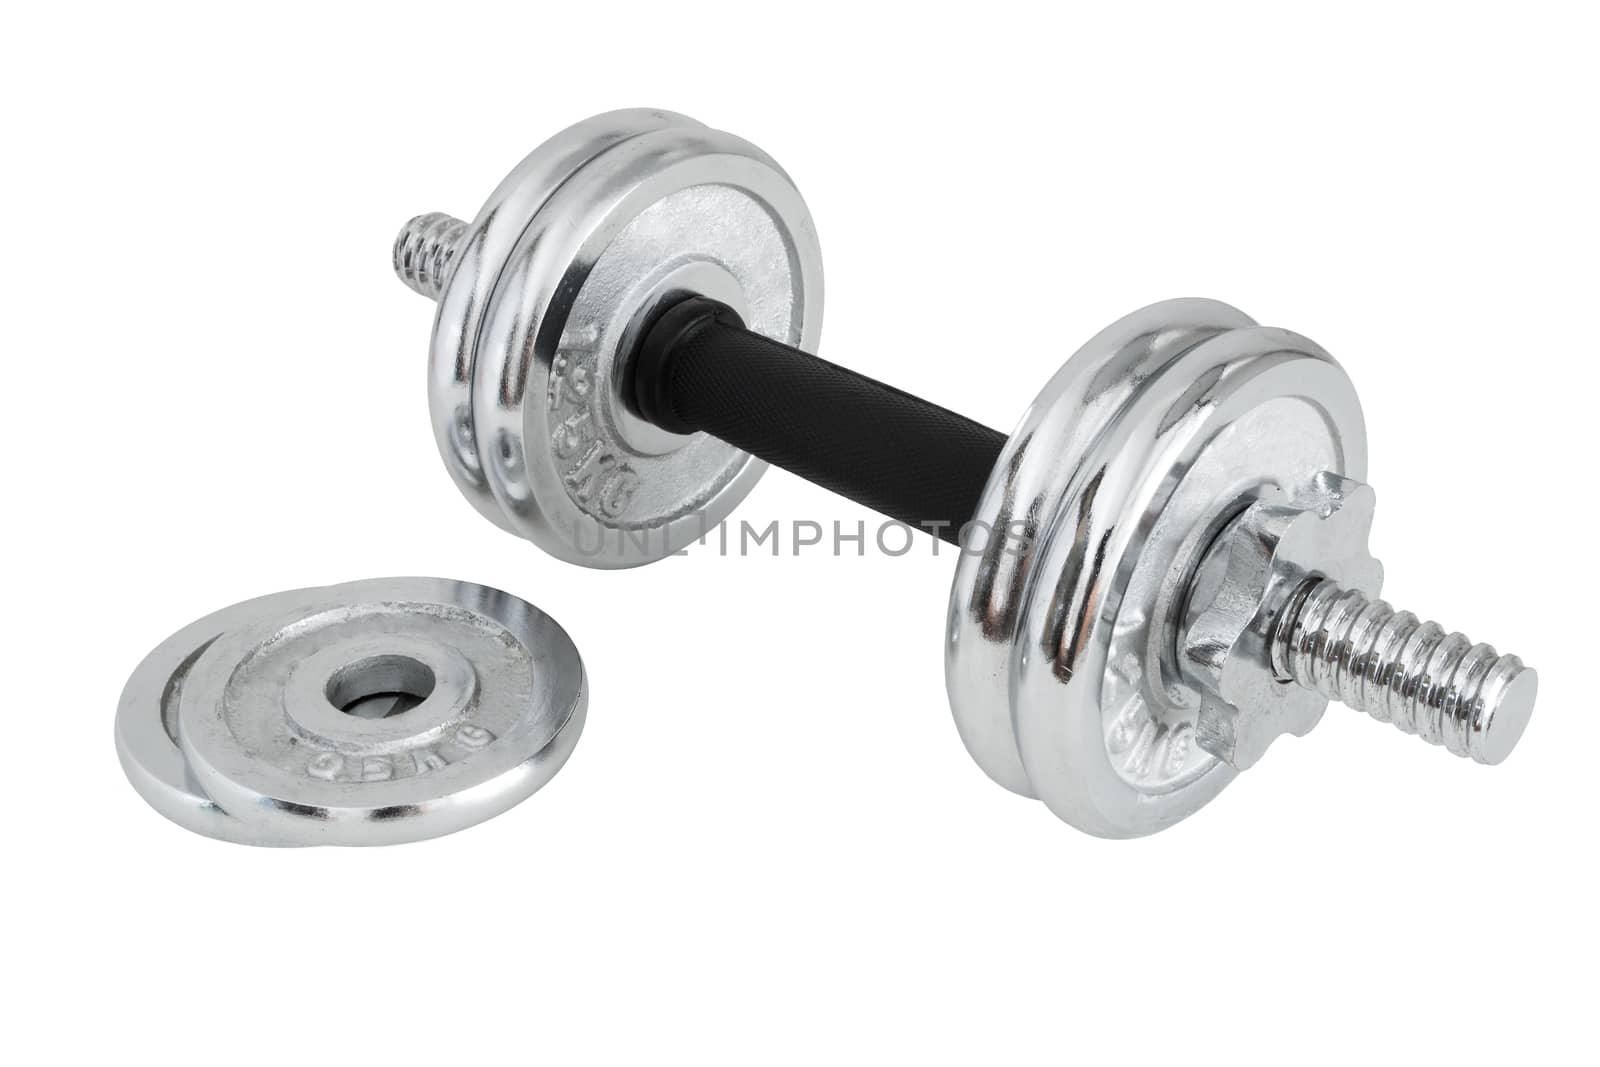 Exercise equipment dumbbell weights for Fitness, isolated on white background